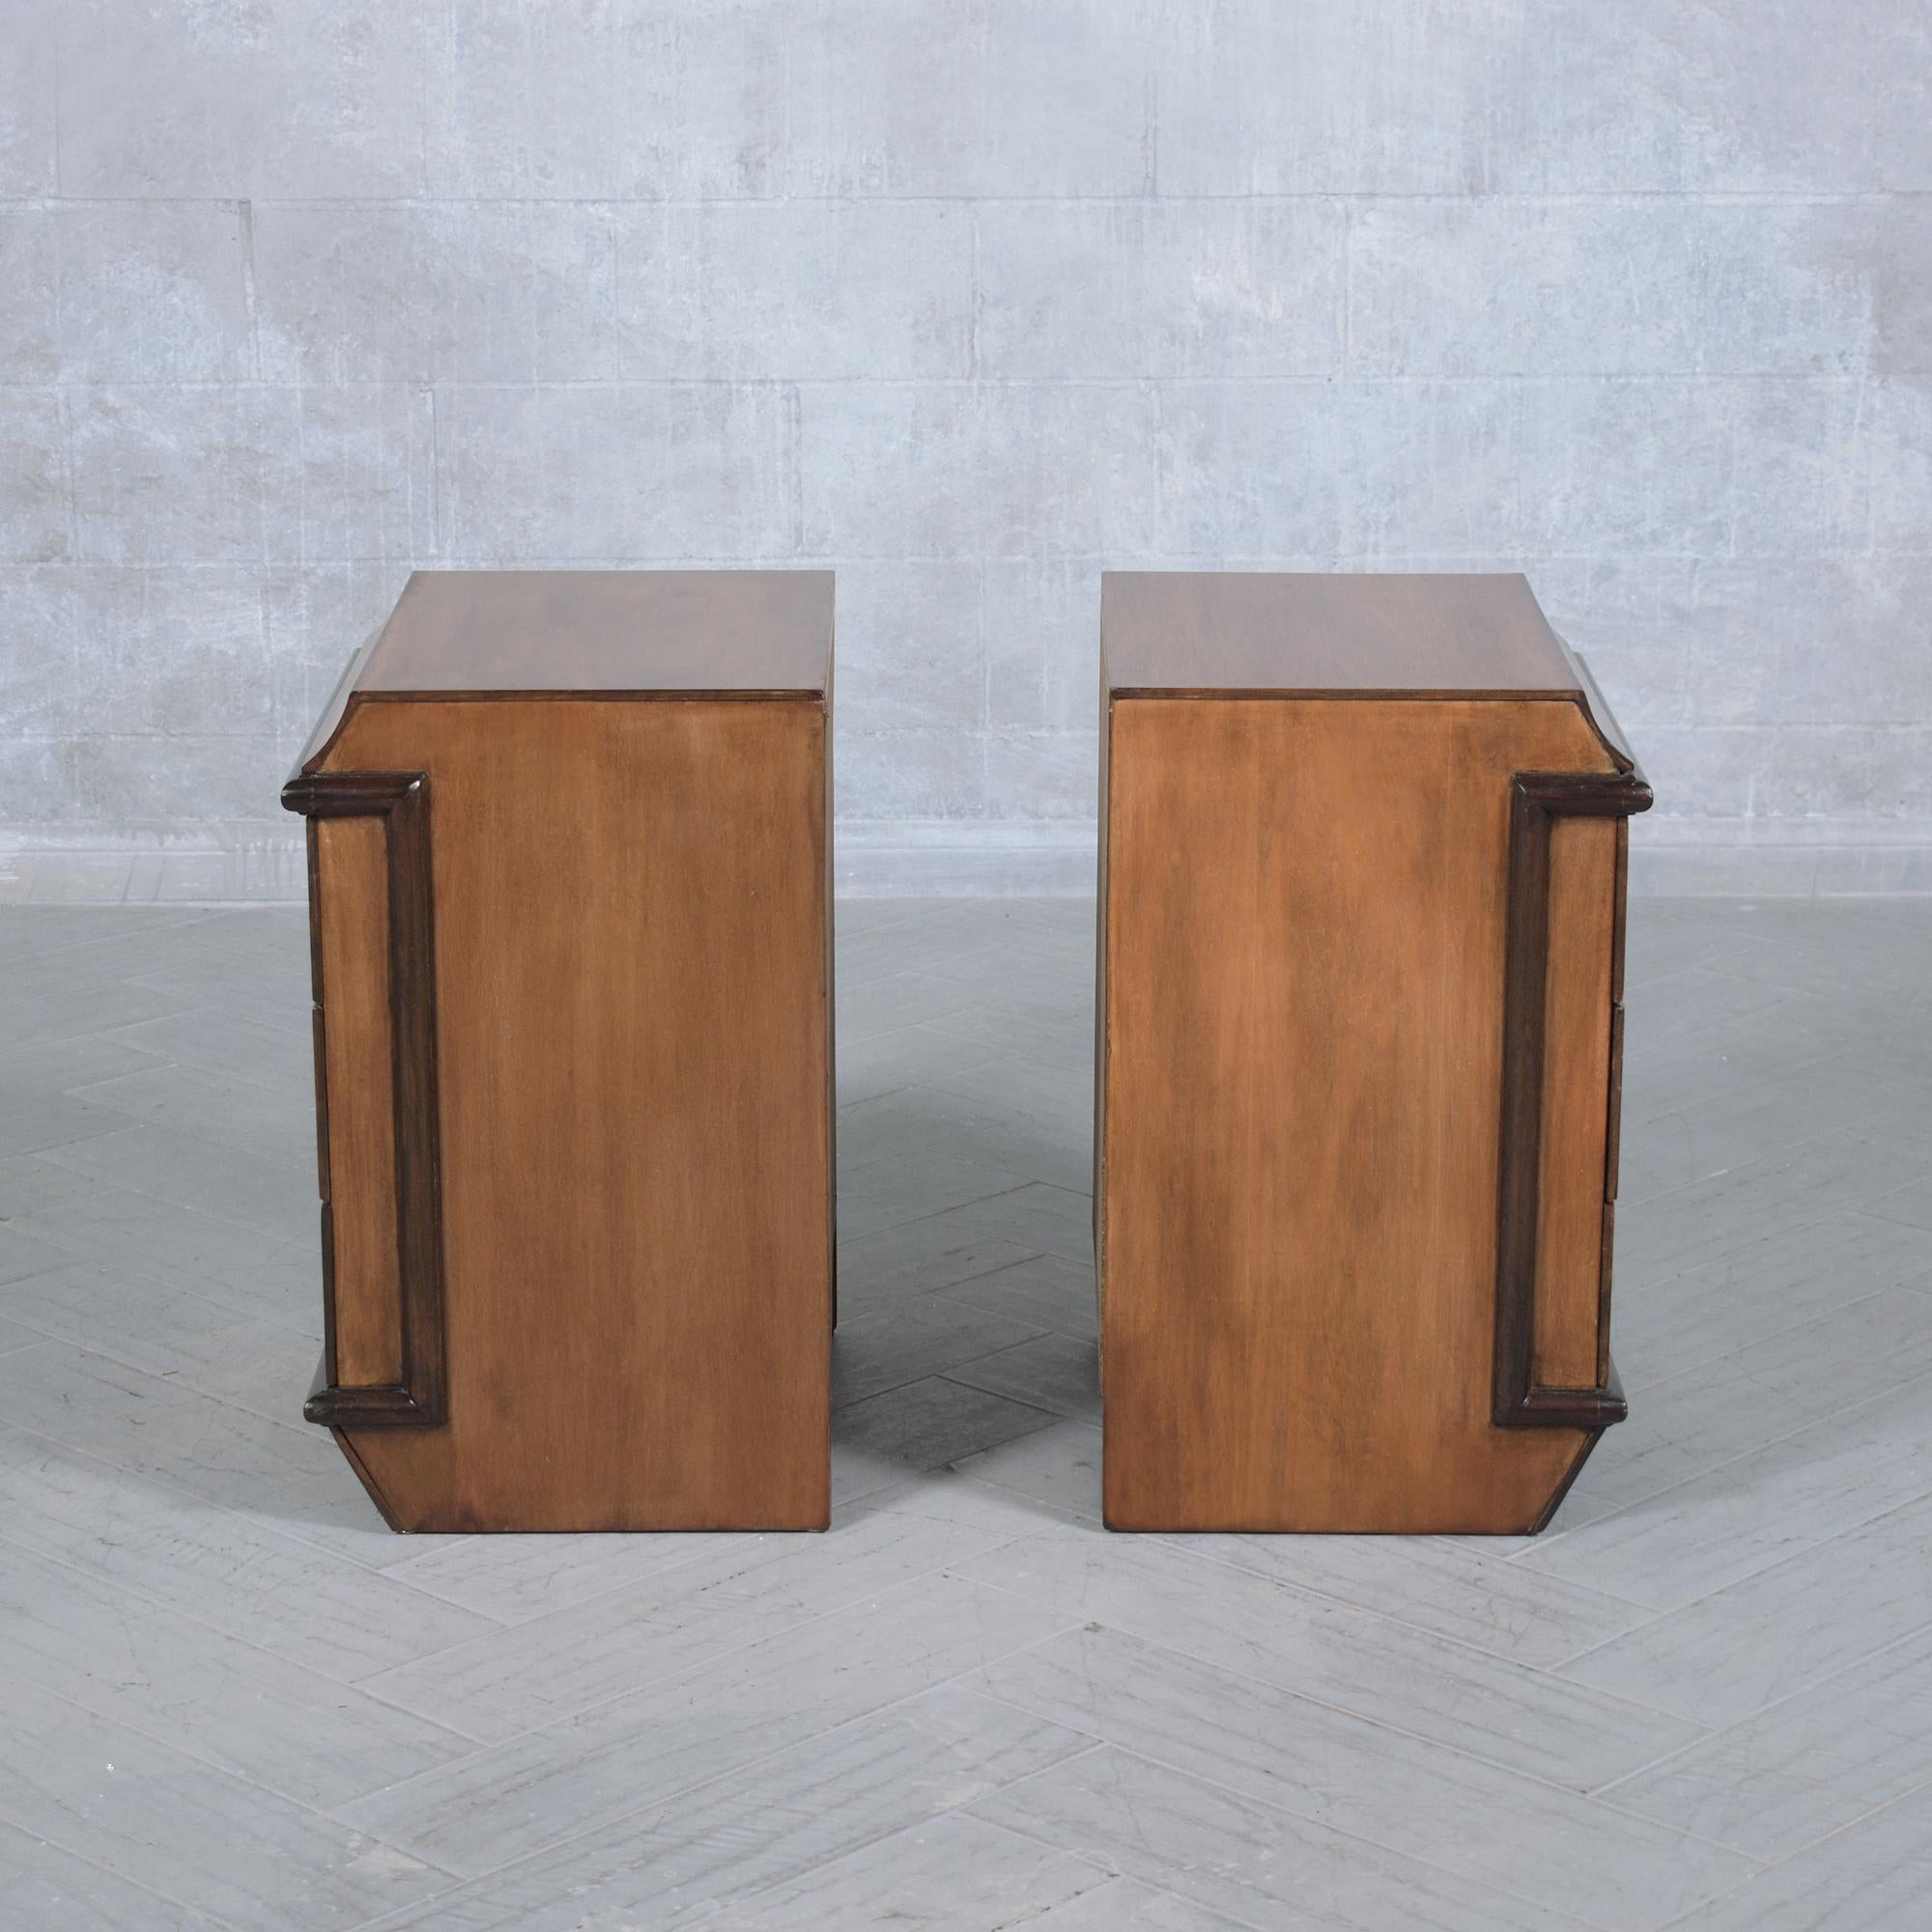 1960s Mid-Century Modern Walnut Nightstands - A Timeless Pair Restored In Good Condition For Sale In Los Angeles, CA